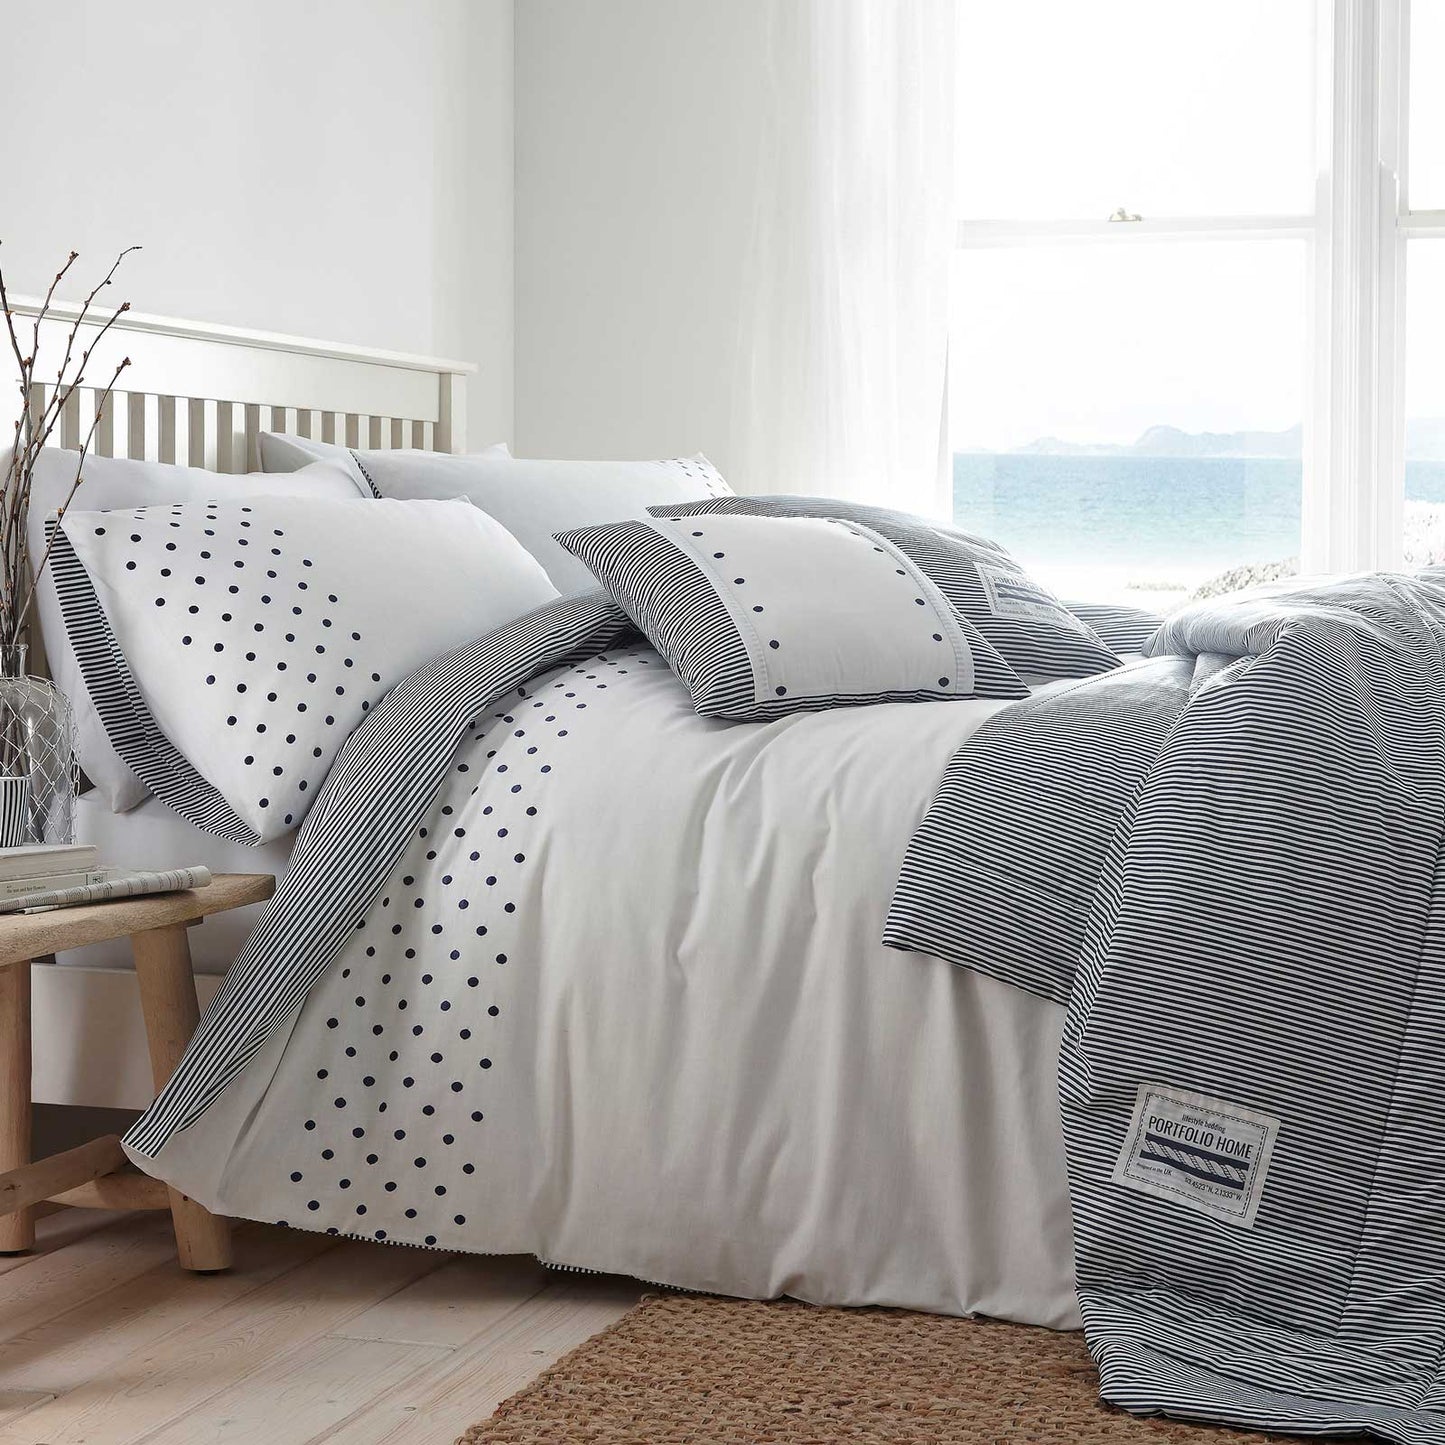 The New England bedding range features a lovely crisp white duvet cover with nautical navy tones of spots and stripe